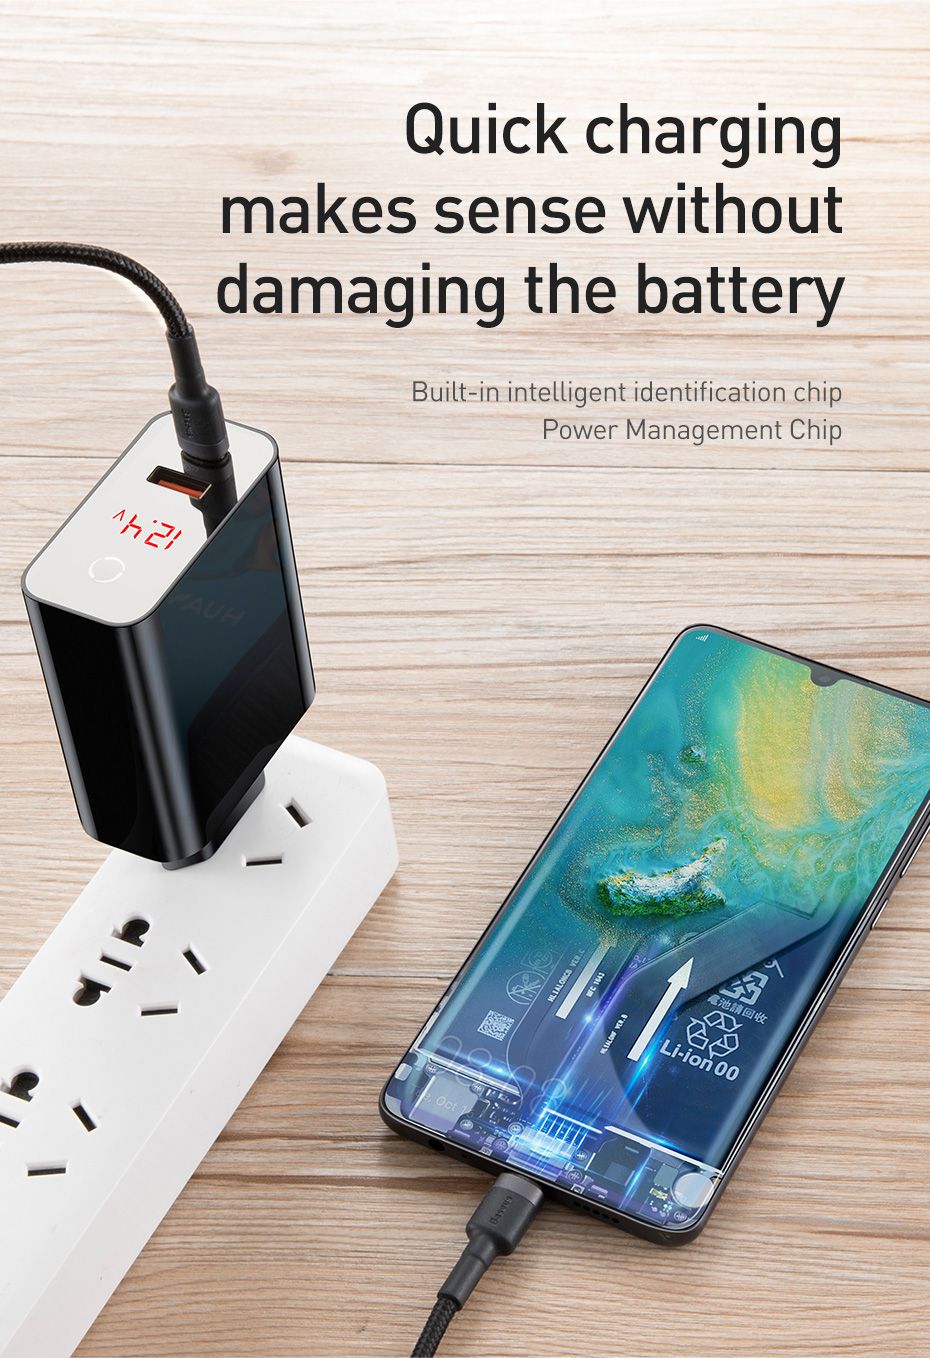 Baseus-45W-Speed-PPS-Intelligent-Power-off-Digital-Display-Quick-Charger-PD30QC30-Type-C-USB-Charger-1488112